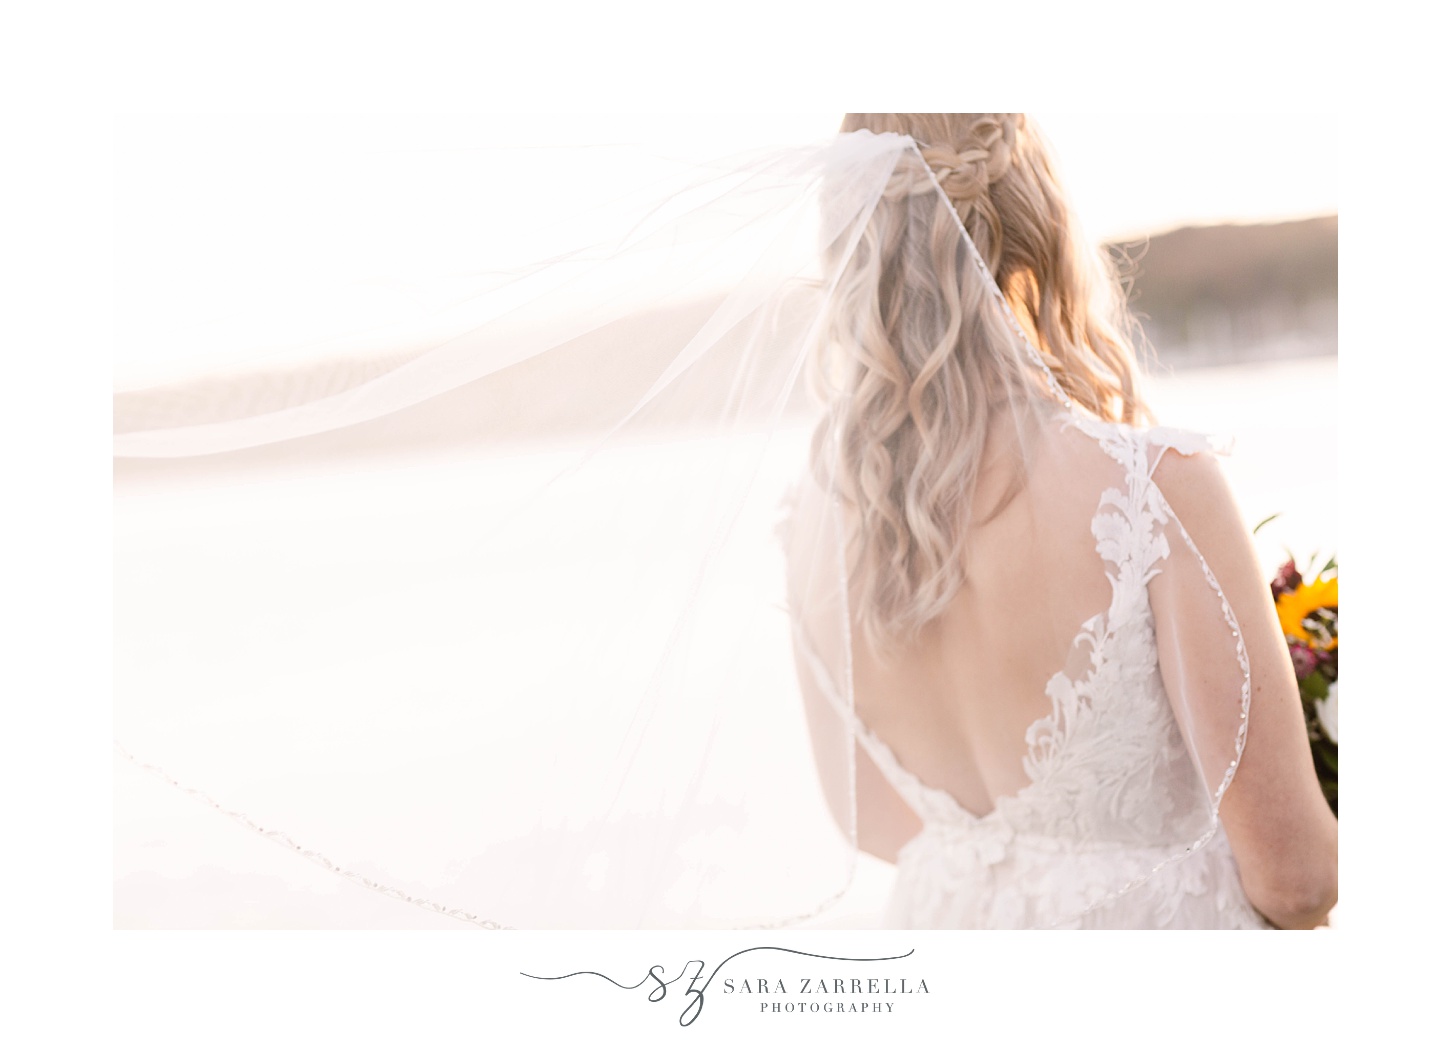 back of bride's gown with lace details